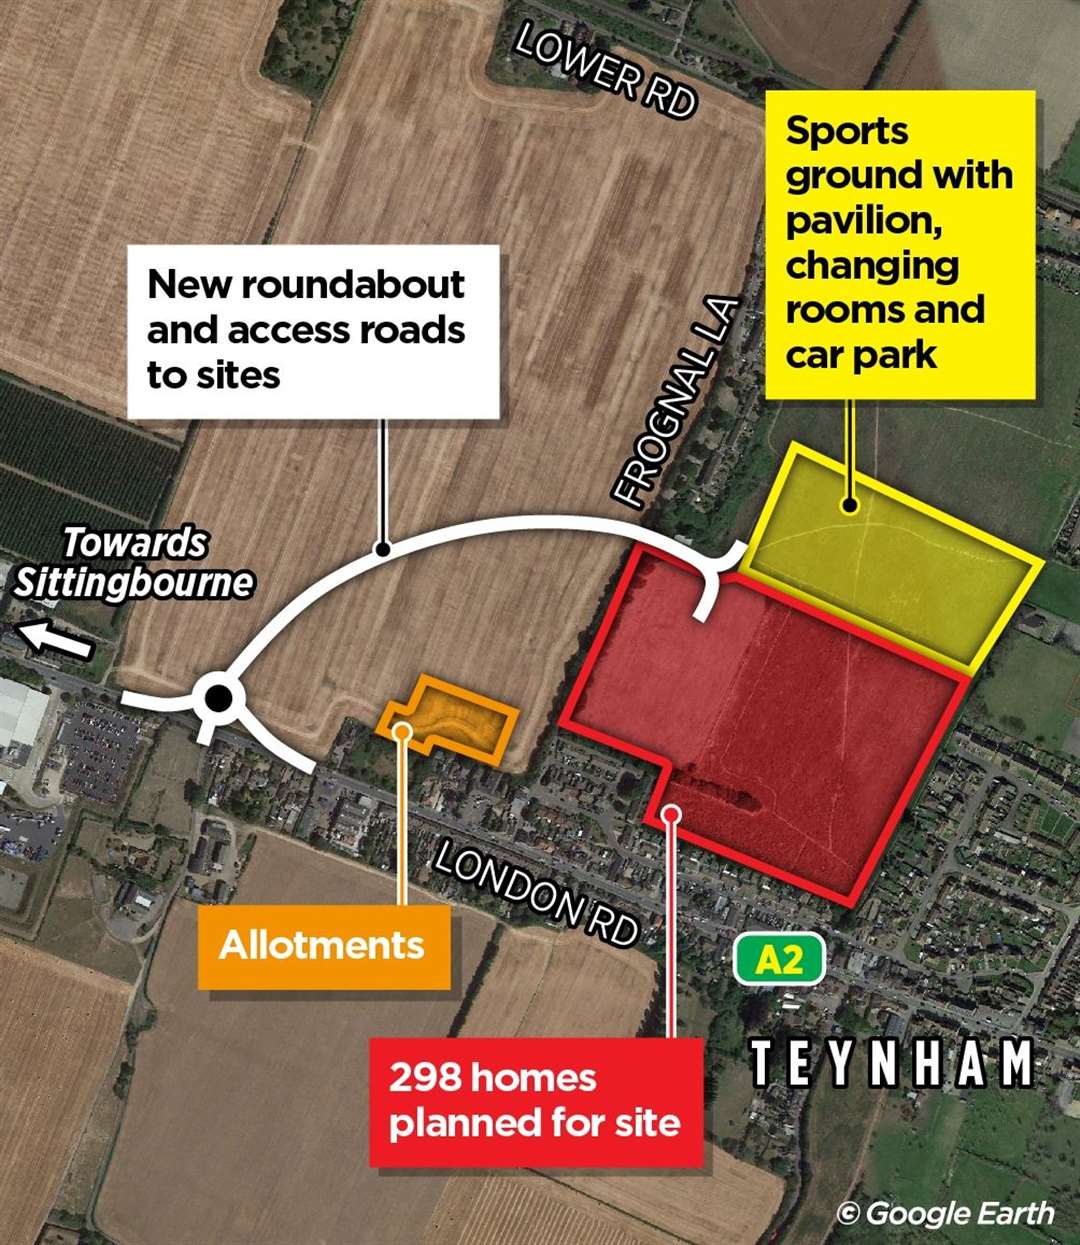 The new roundabout on London Road, Teynham will connect the access road from the Frognal Lane development to the A2